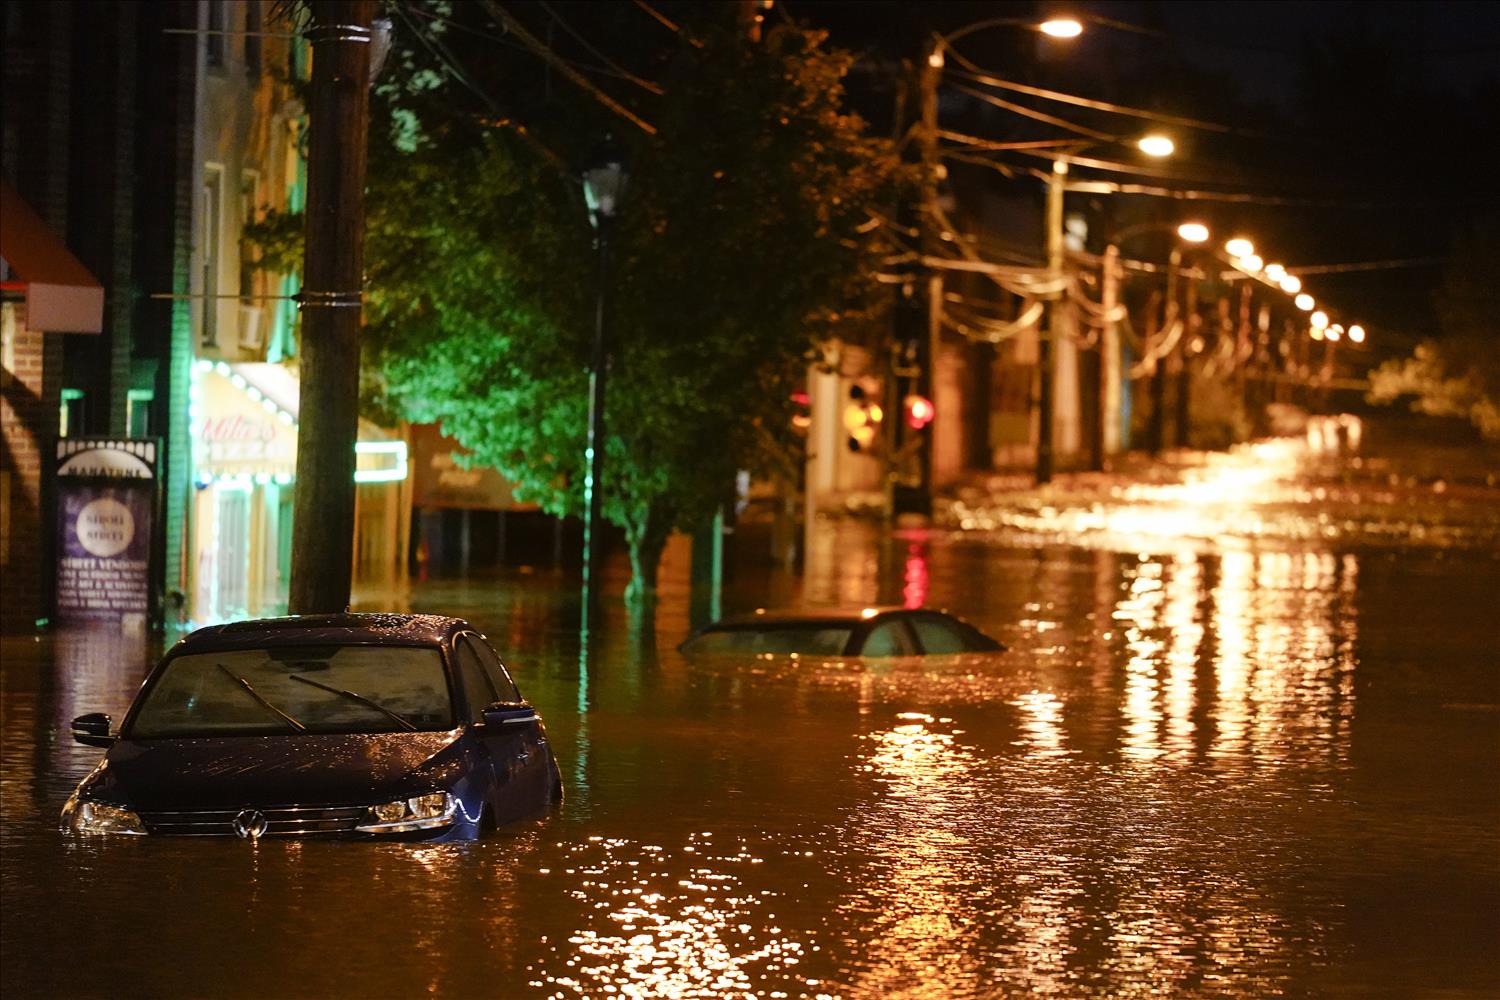 Hurricane Ida: 2 reasons for its record-shattering rainfall in NYC and the Northeast long after the winds weakened